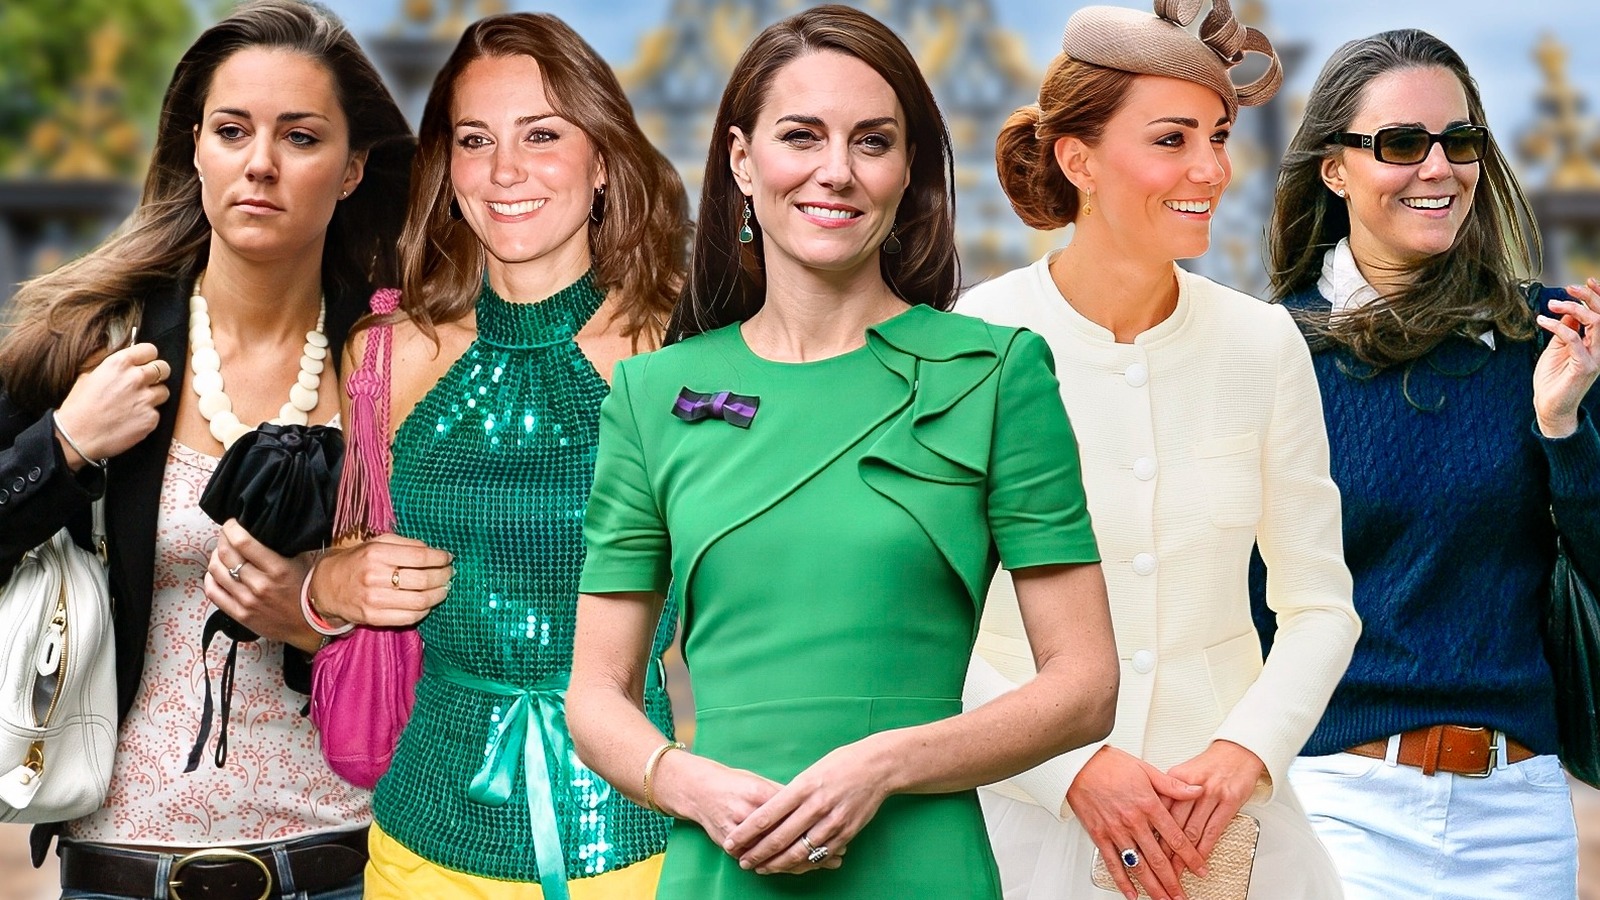 See Kate Middleton's style evolution as Princess of Wales